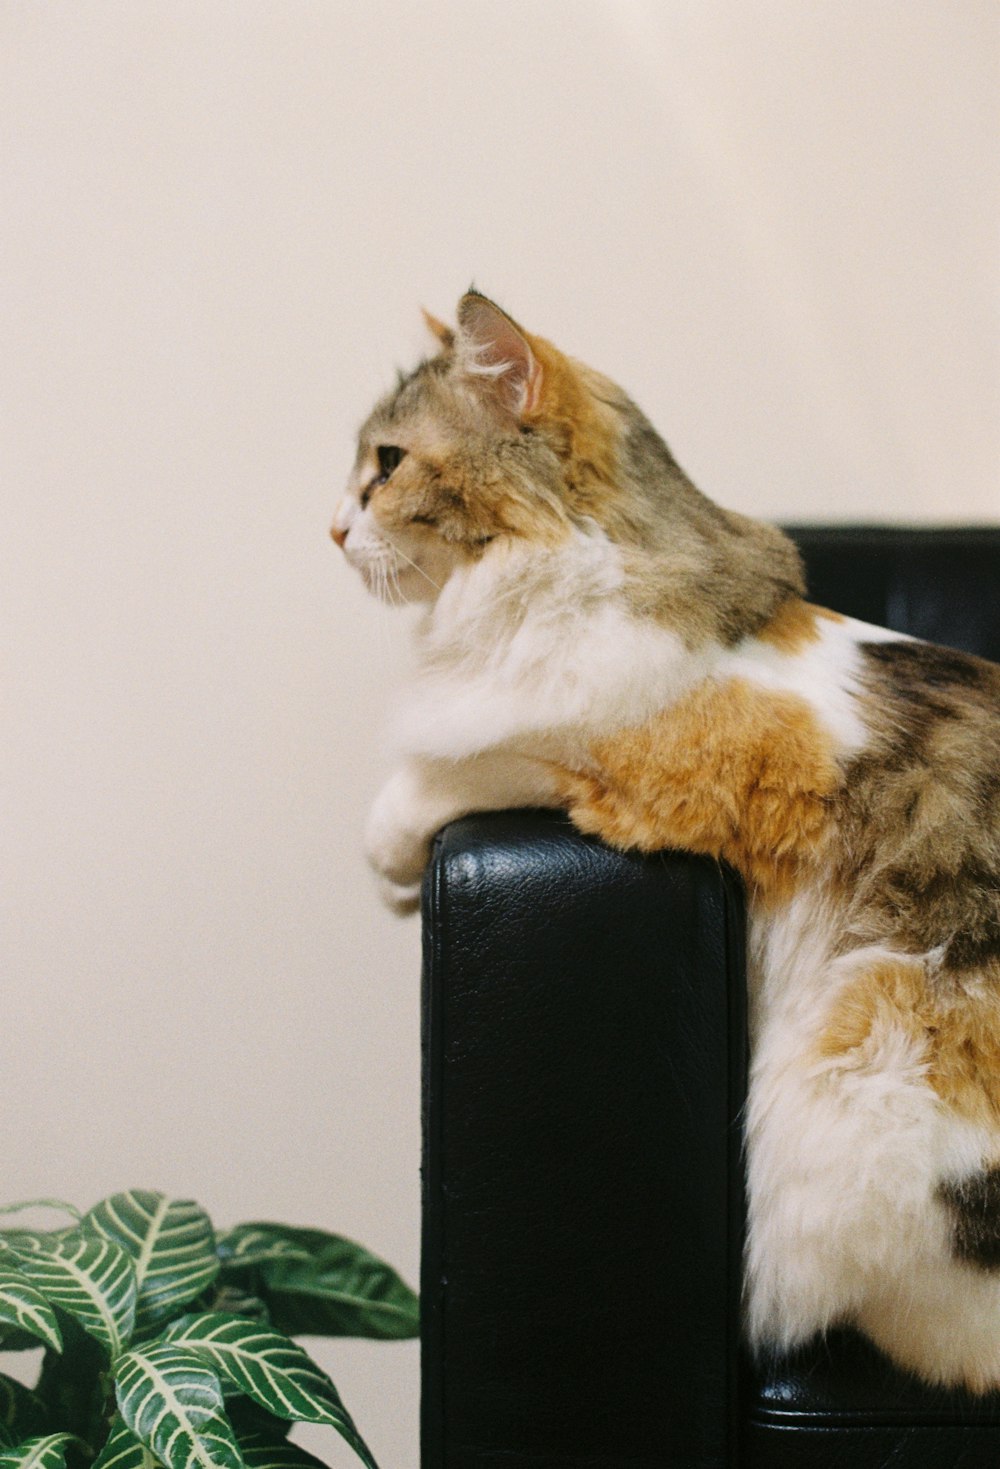 brown and white coated cat sitting on black leather armchair